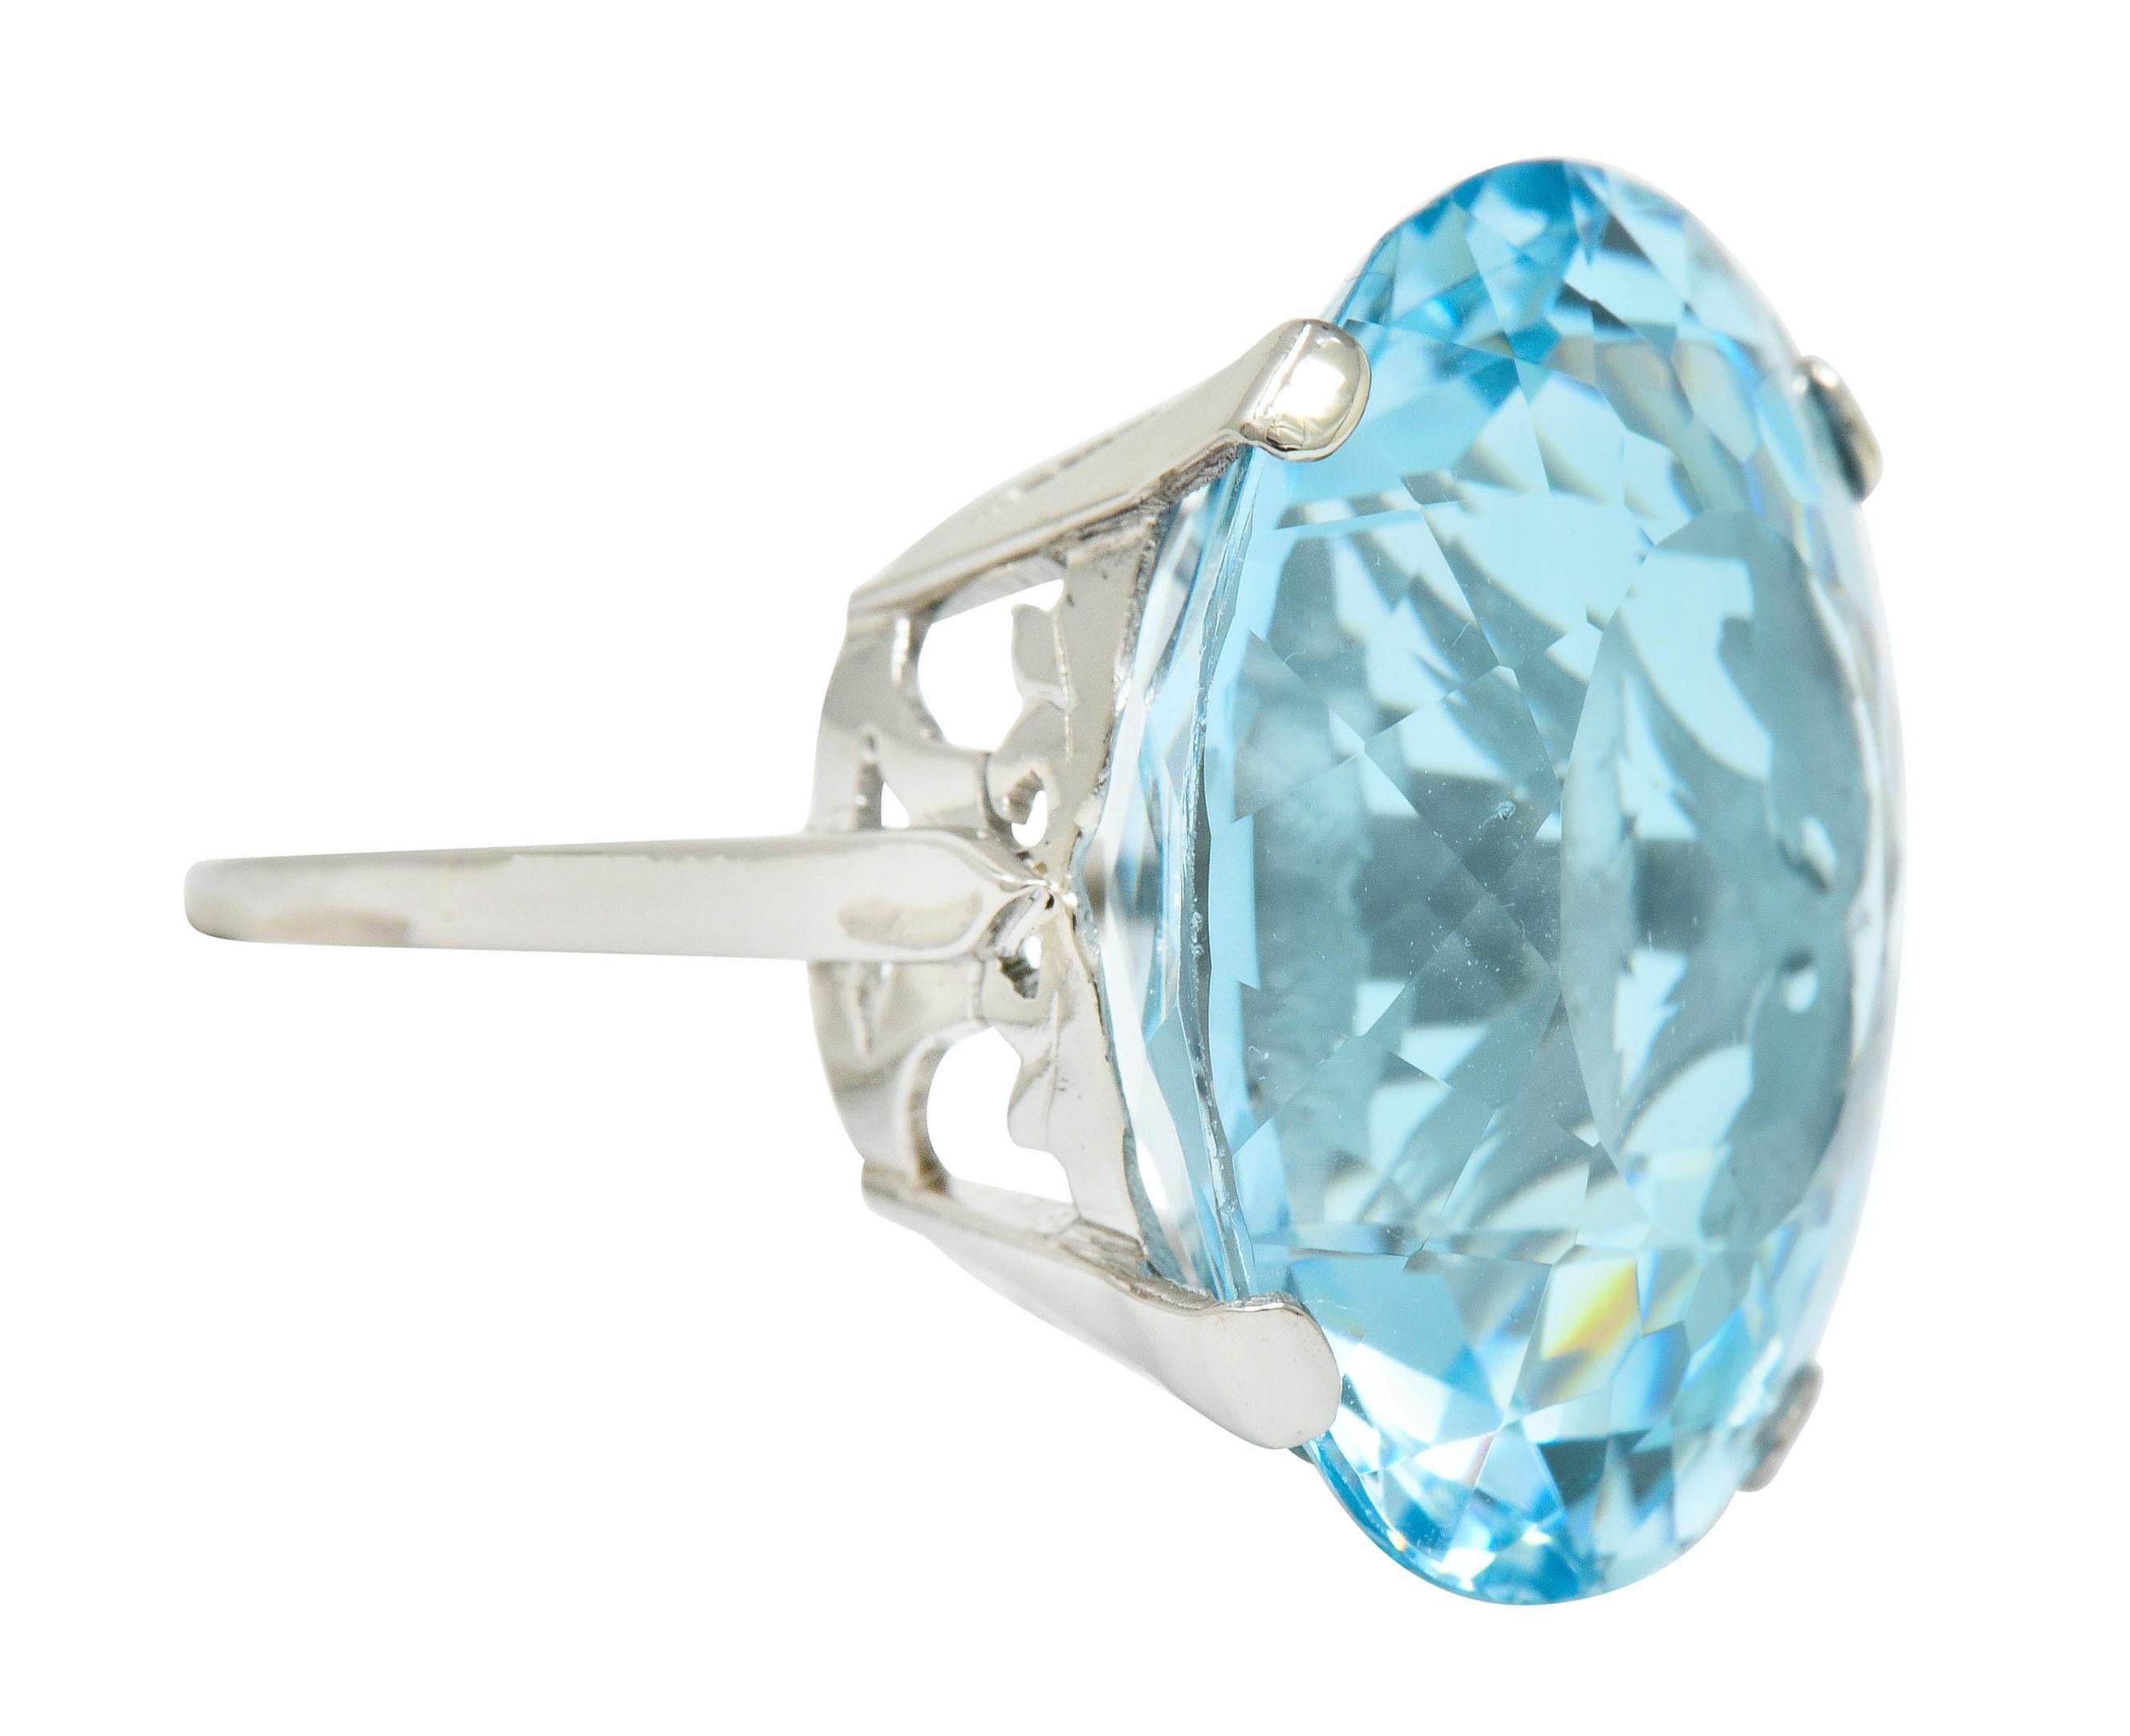 Centering a substantial oval mixed cut aquamarine weighing 39.48 carats, eye-clean and a bright light blue color

Prong set in mounting with an intricately pierced gallery featuring a stylized bow motif

Tested as 18 karat gold and stamped with